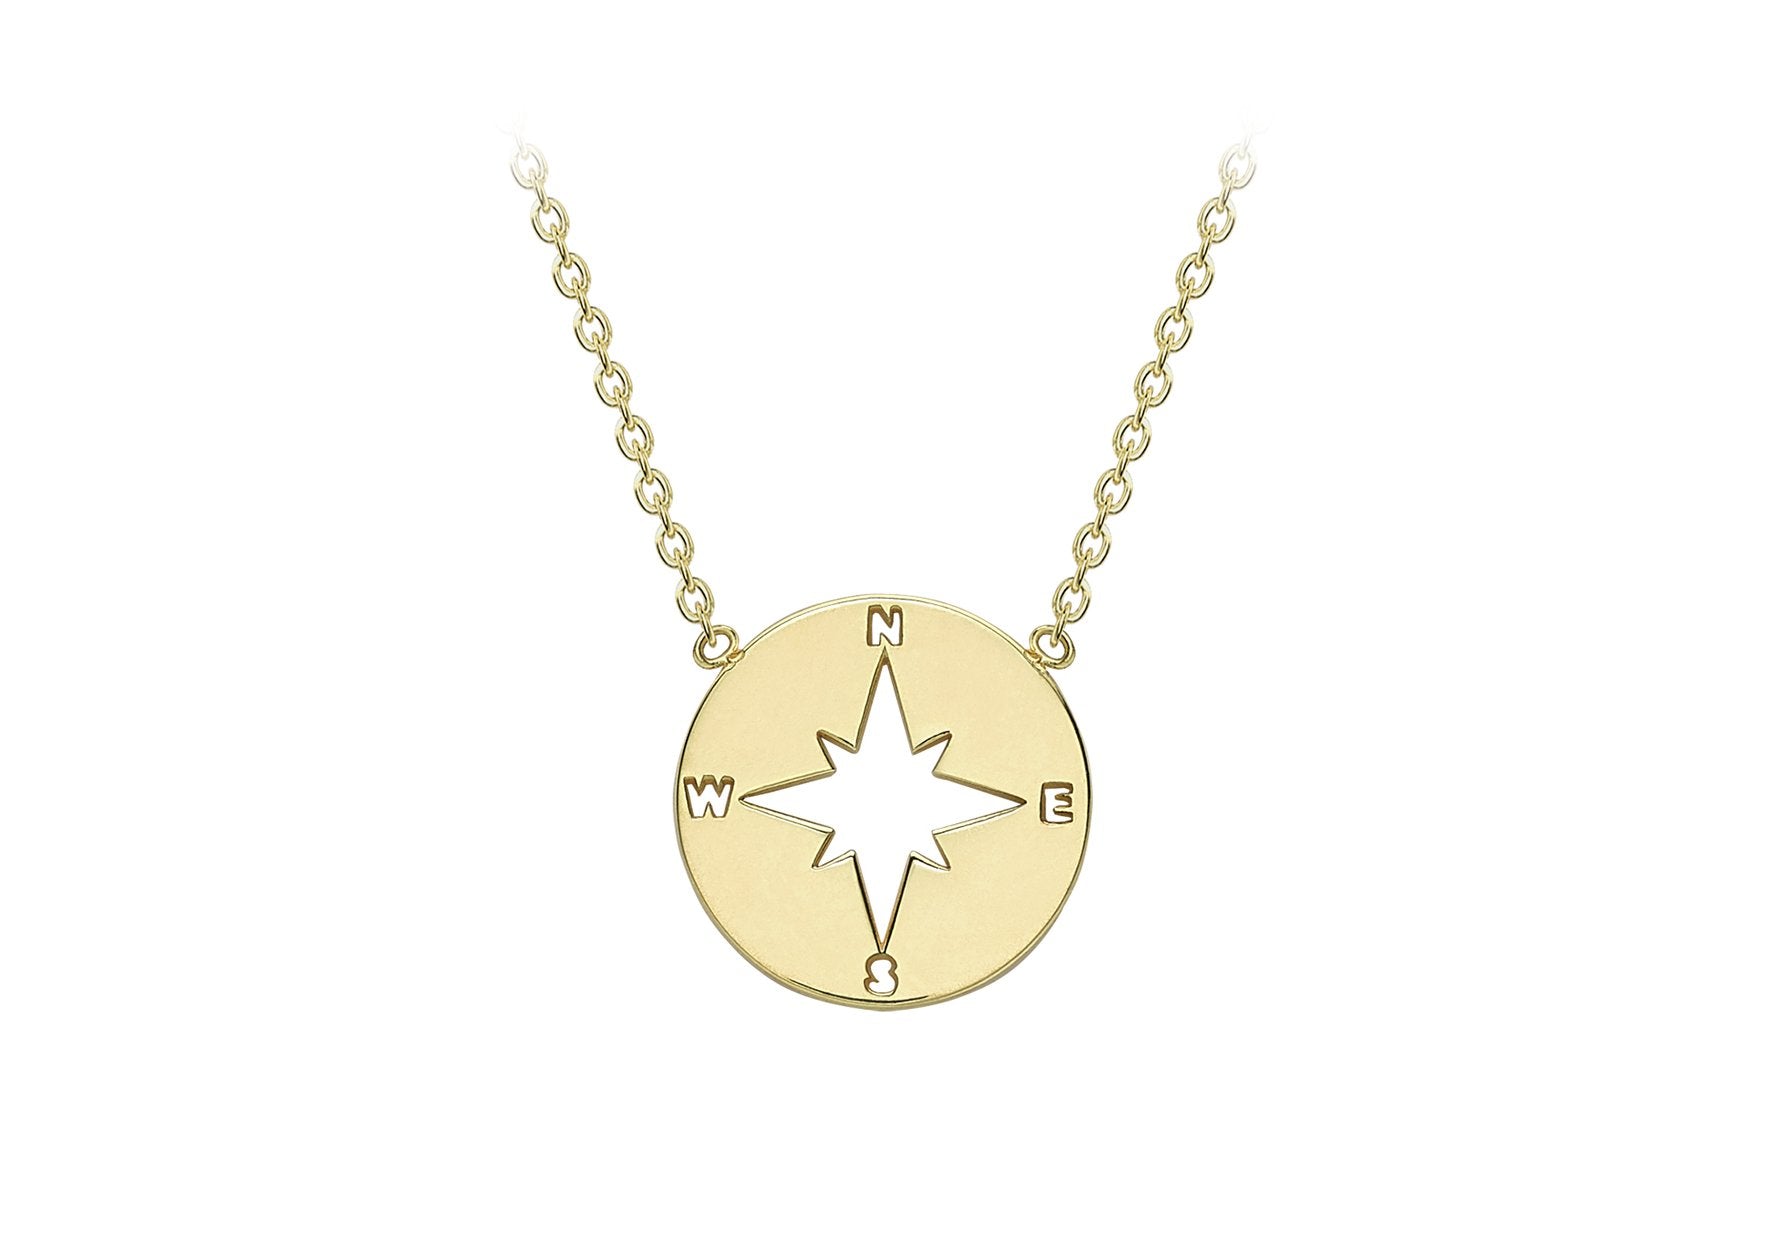 9ct Yellow Gold Cut Out Compass Pendant and Chain